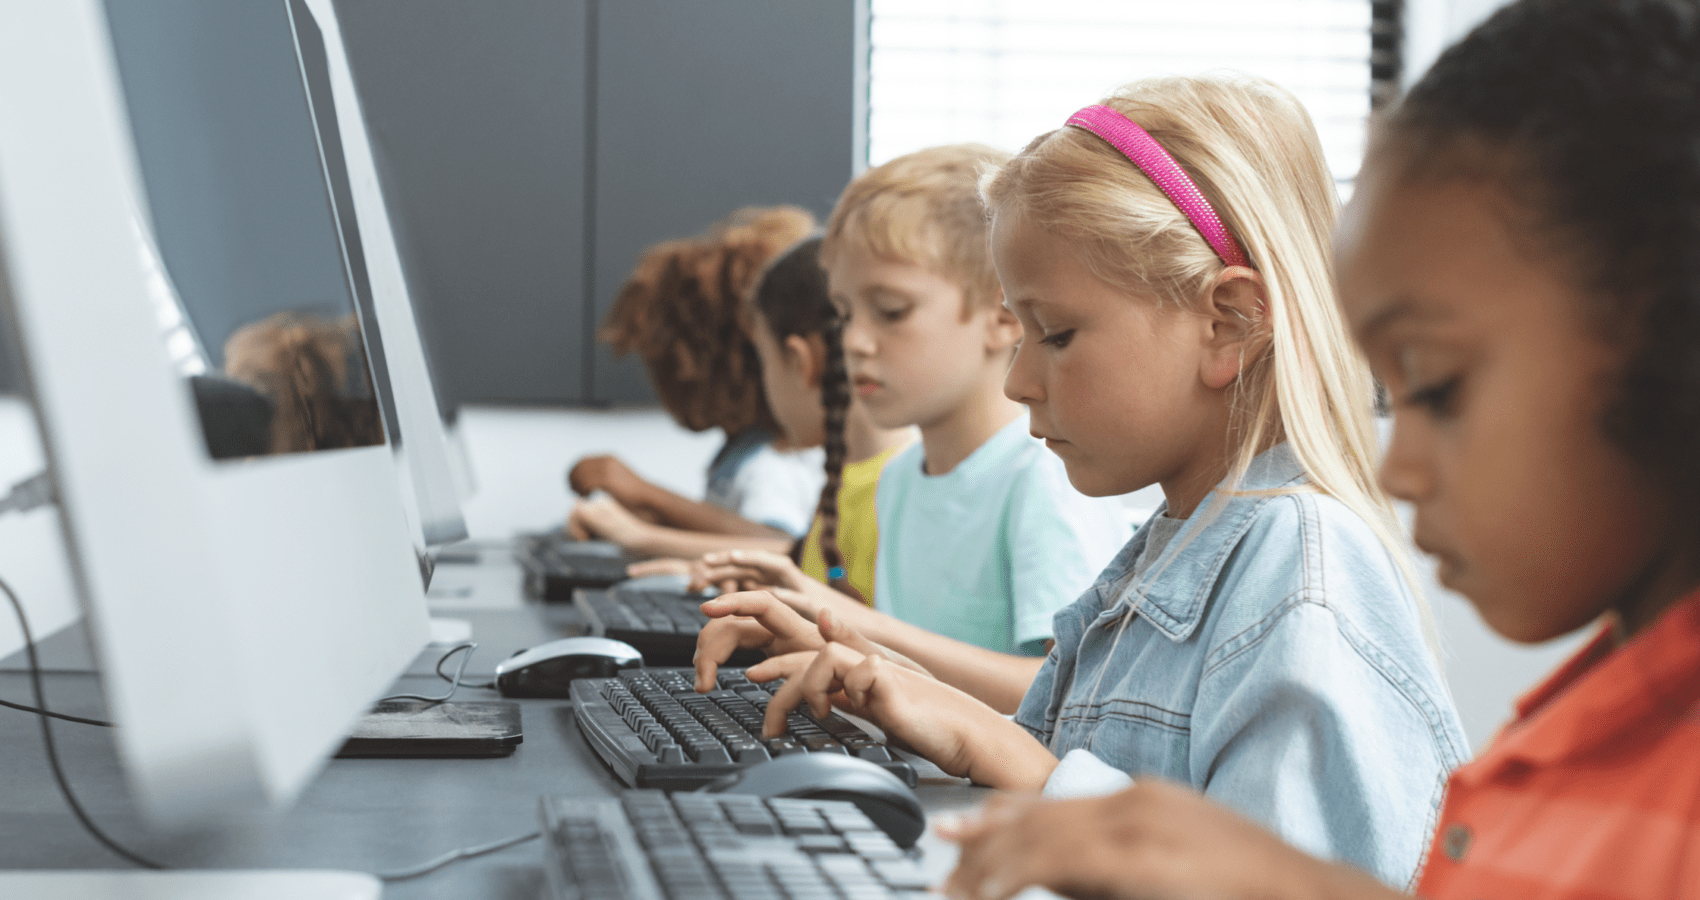 A Comprehensive Guide to Data Privacy for K-12 Educators